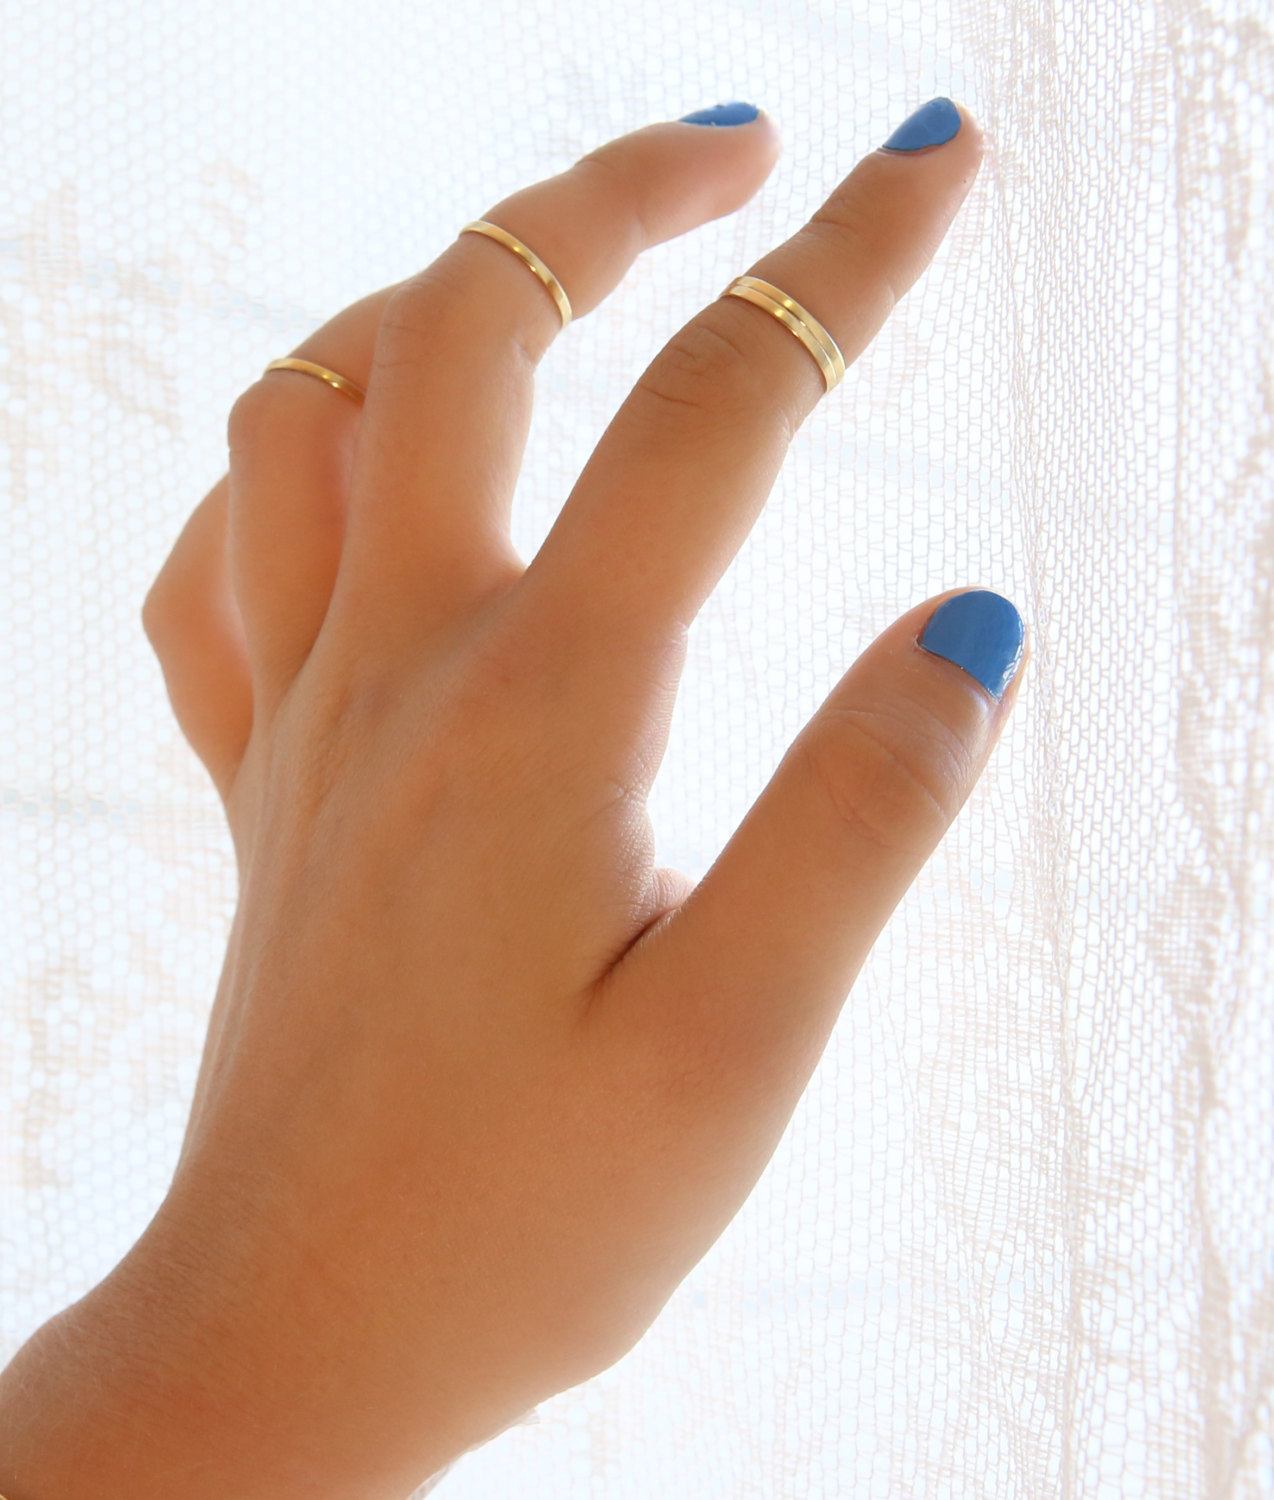 Thin Ring, Knuckle Rings, Above Knuckle Rings, Midi Gold Rings, Thin Rings, Stackable Rings,1 Gold Knuckle Rings A548